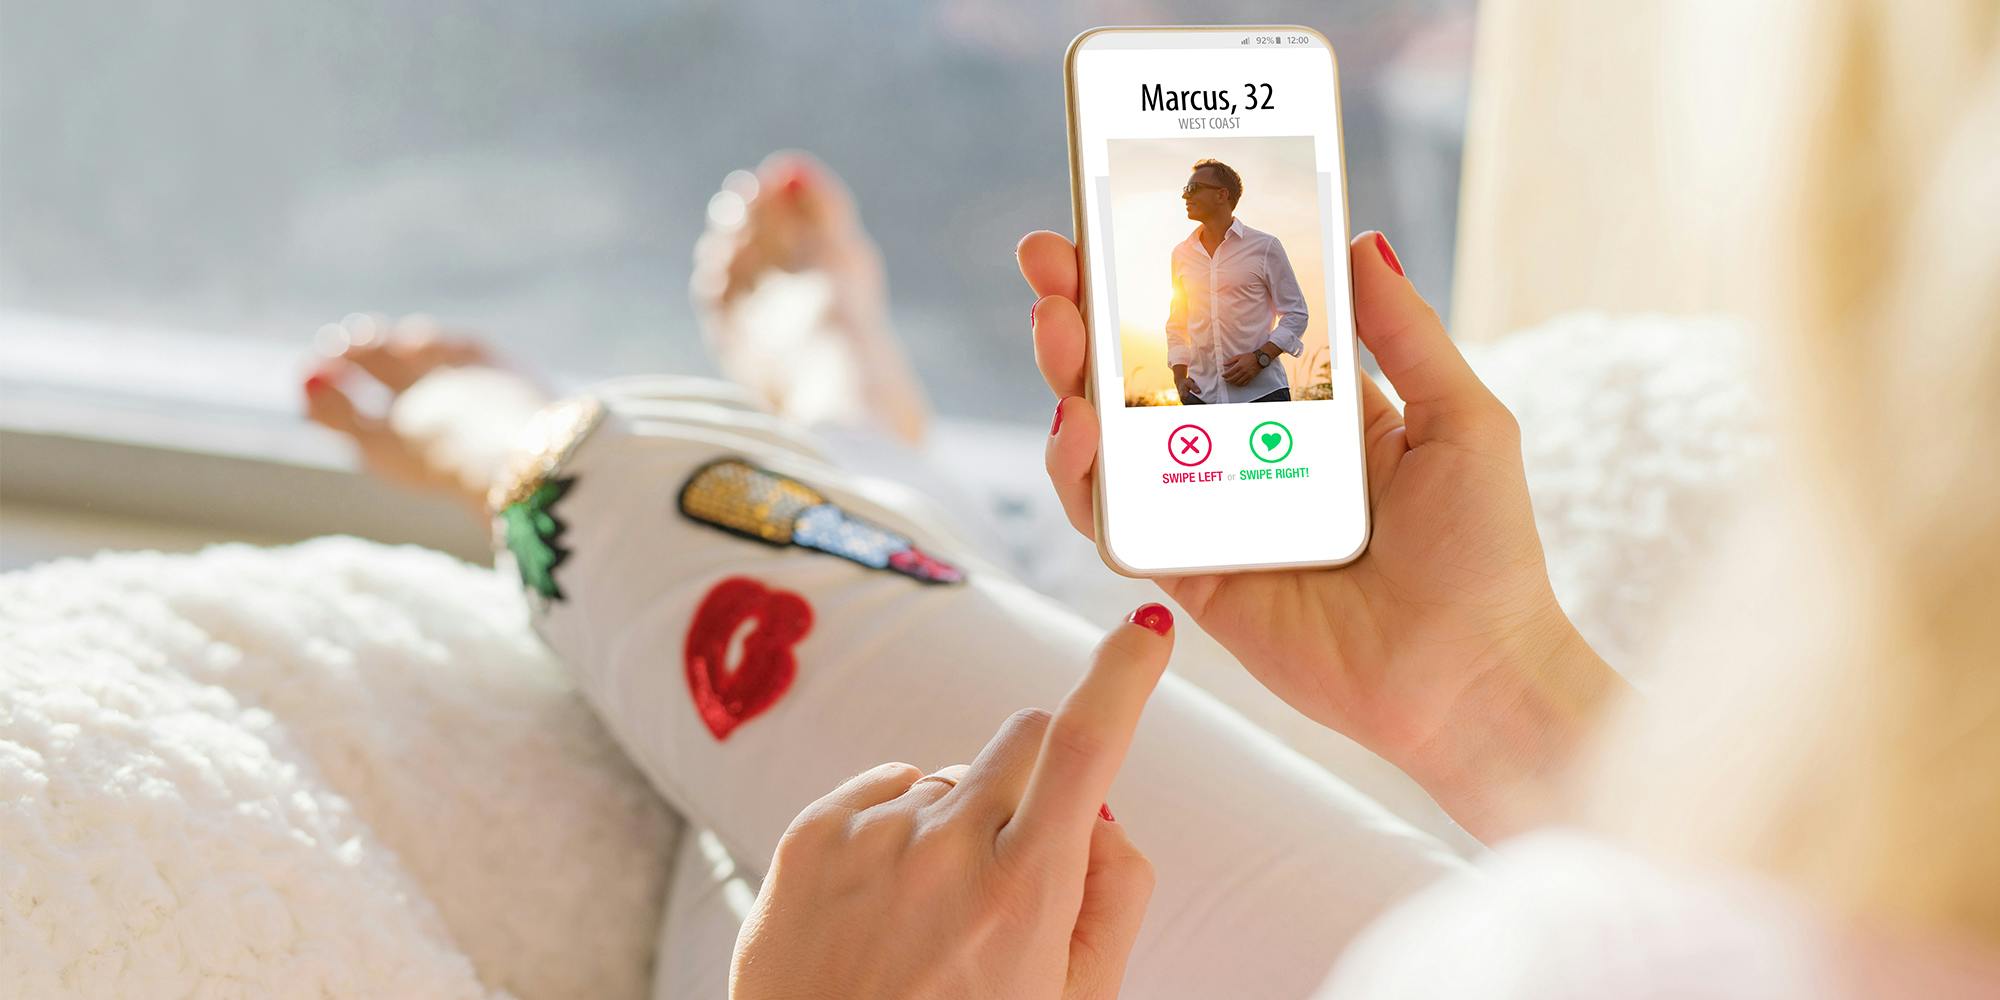 13 casual dating apps that only ask for your confidence